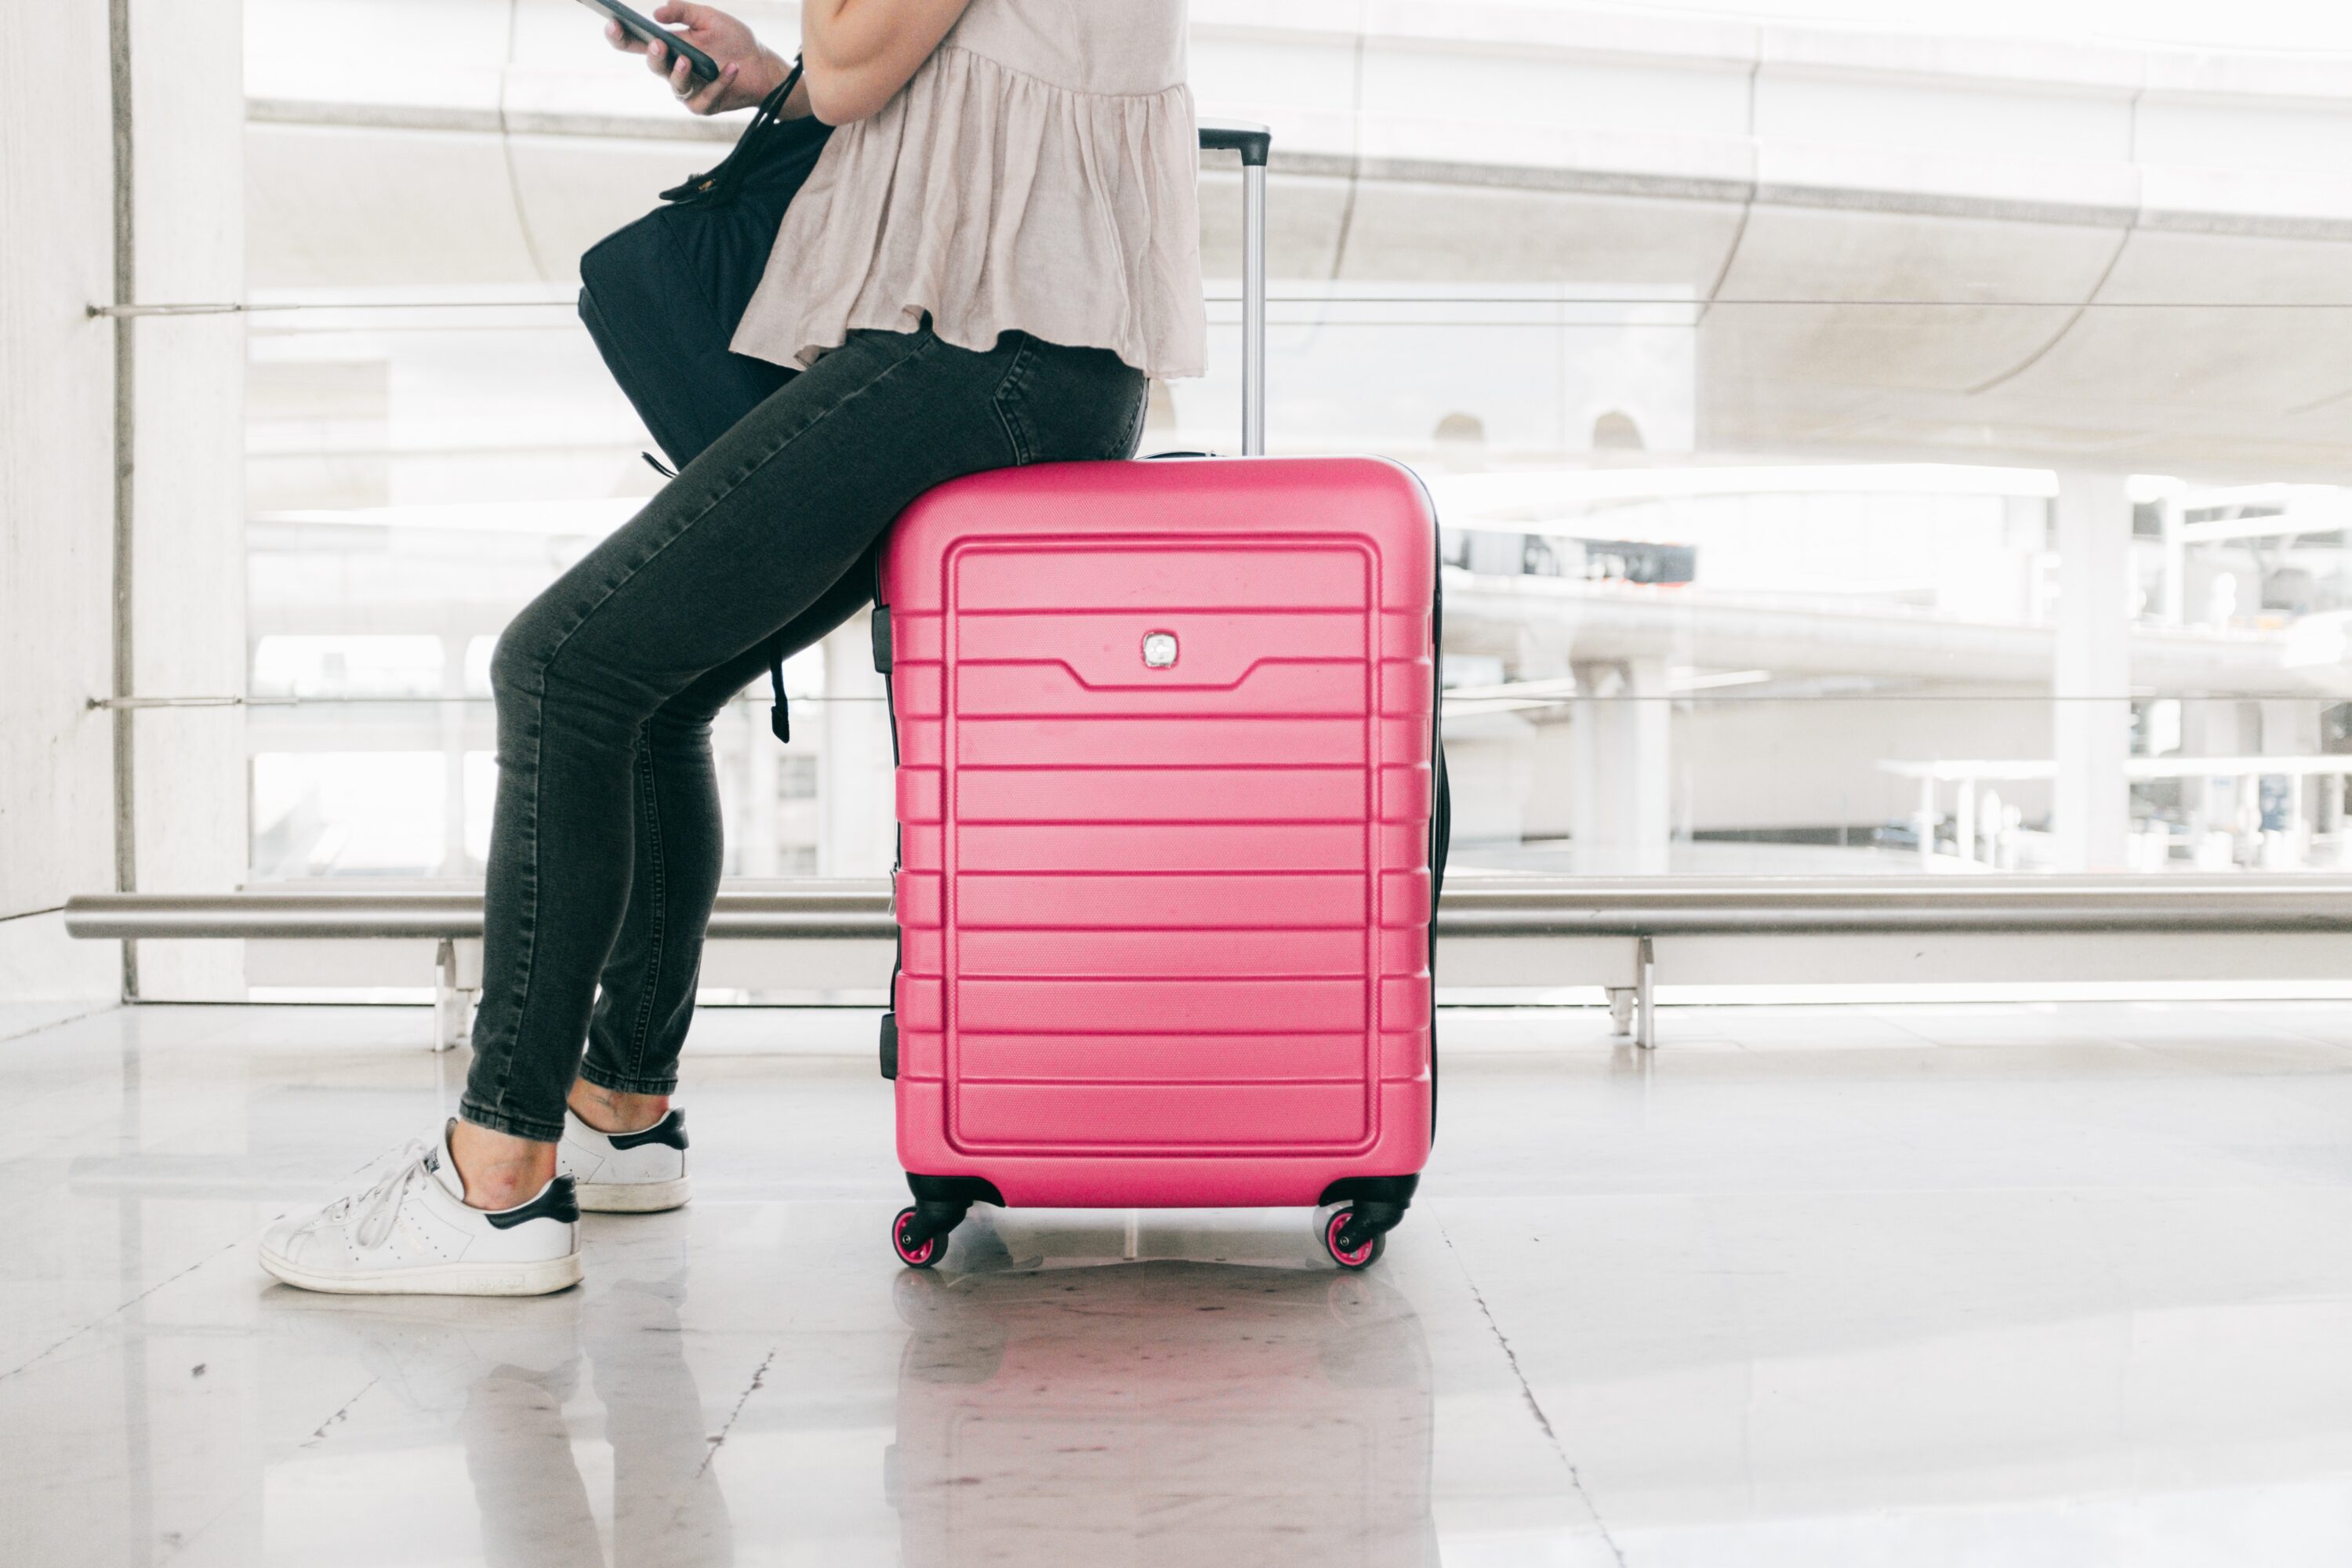 This Vacuum-Sealing Suitcase Is The Best Luggage For Over-Packers